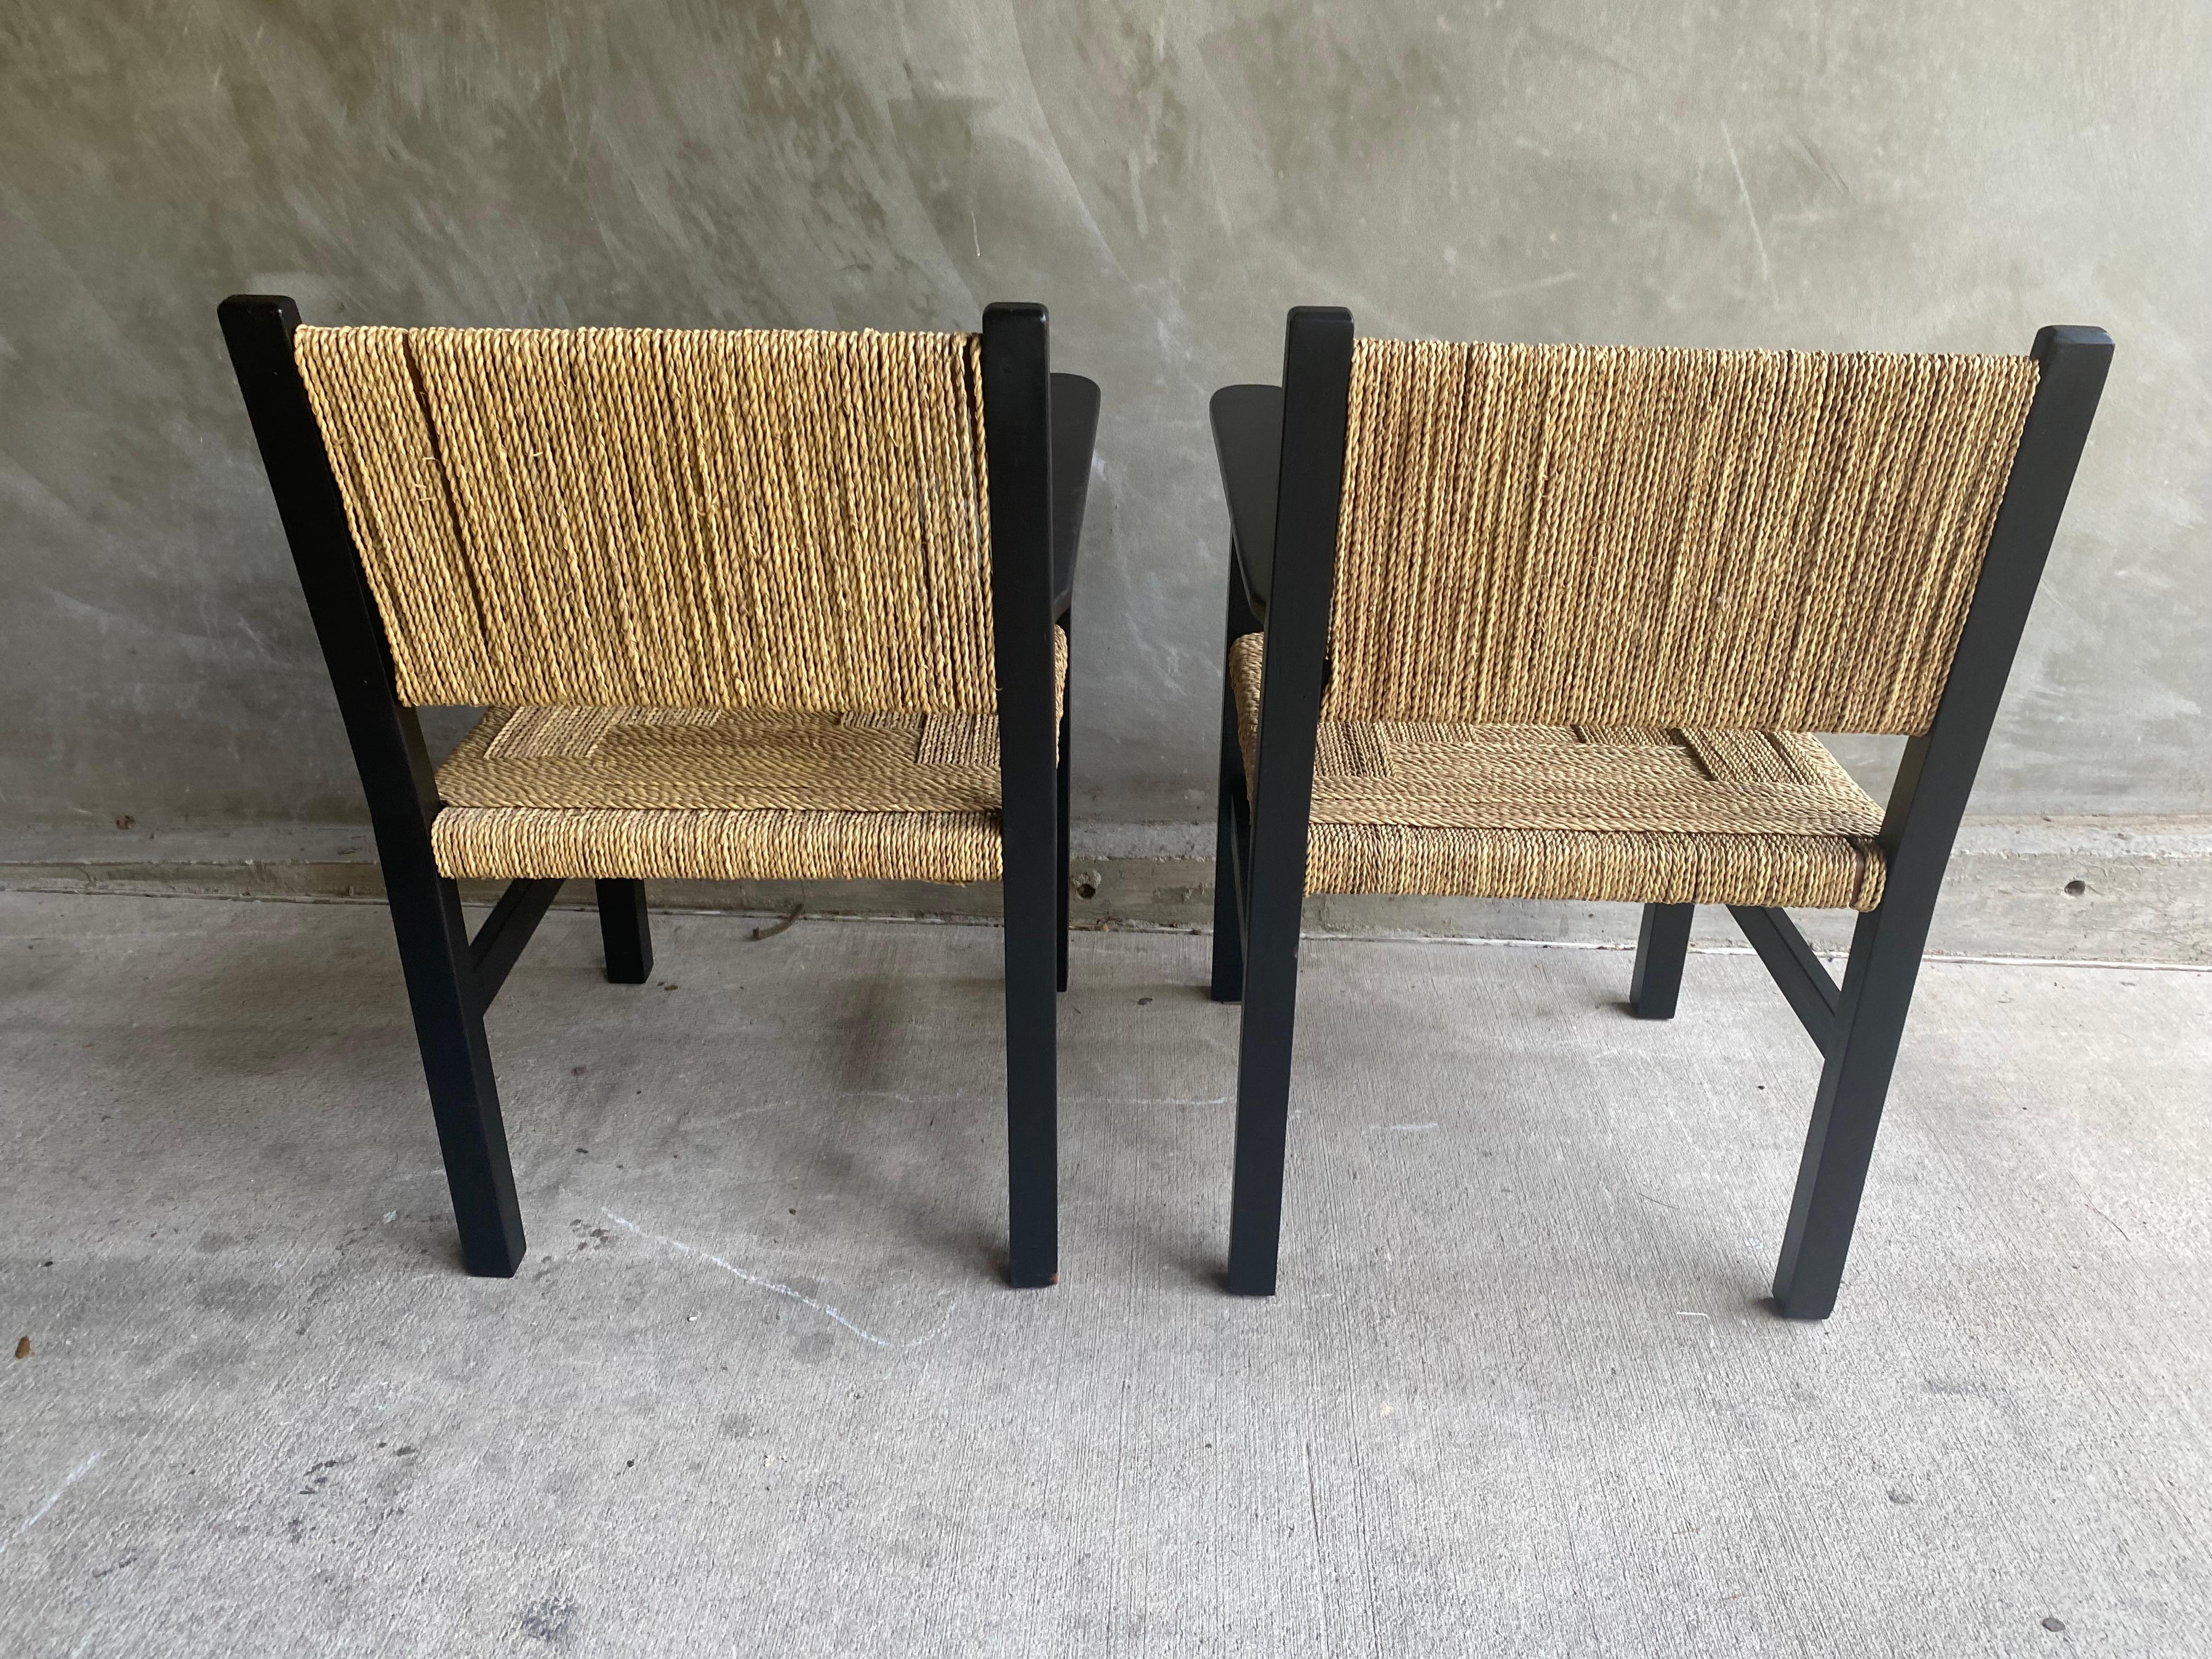 Pair of Black Lacquered and Woven Rope Armchairs, France, 1950's For Sale 2